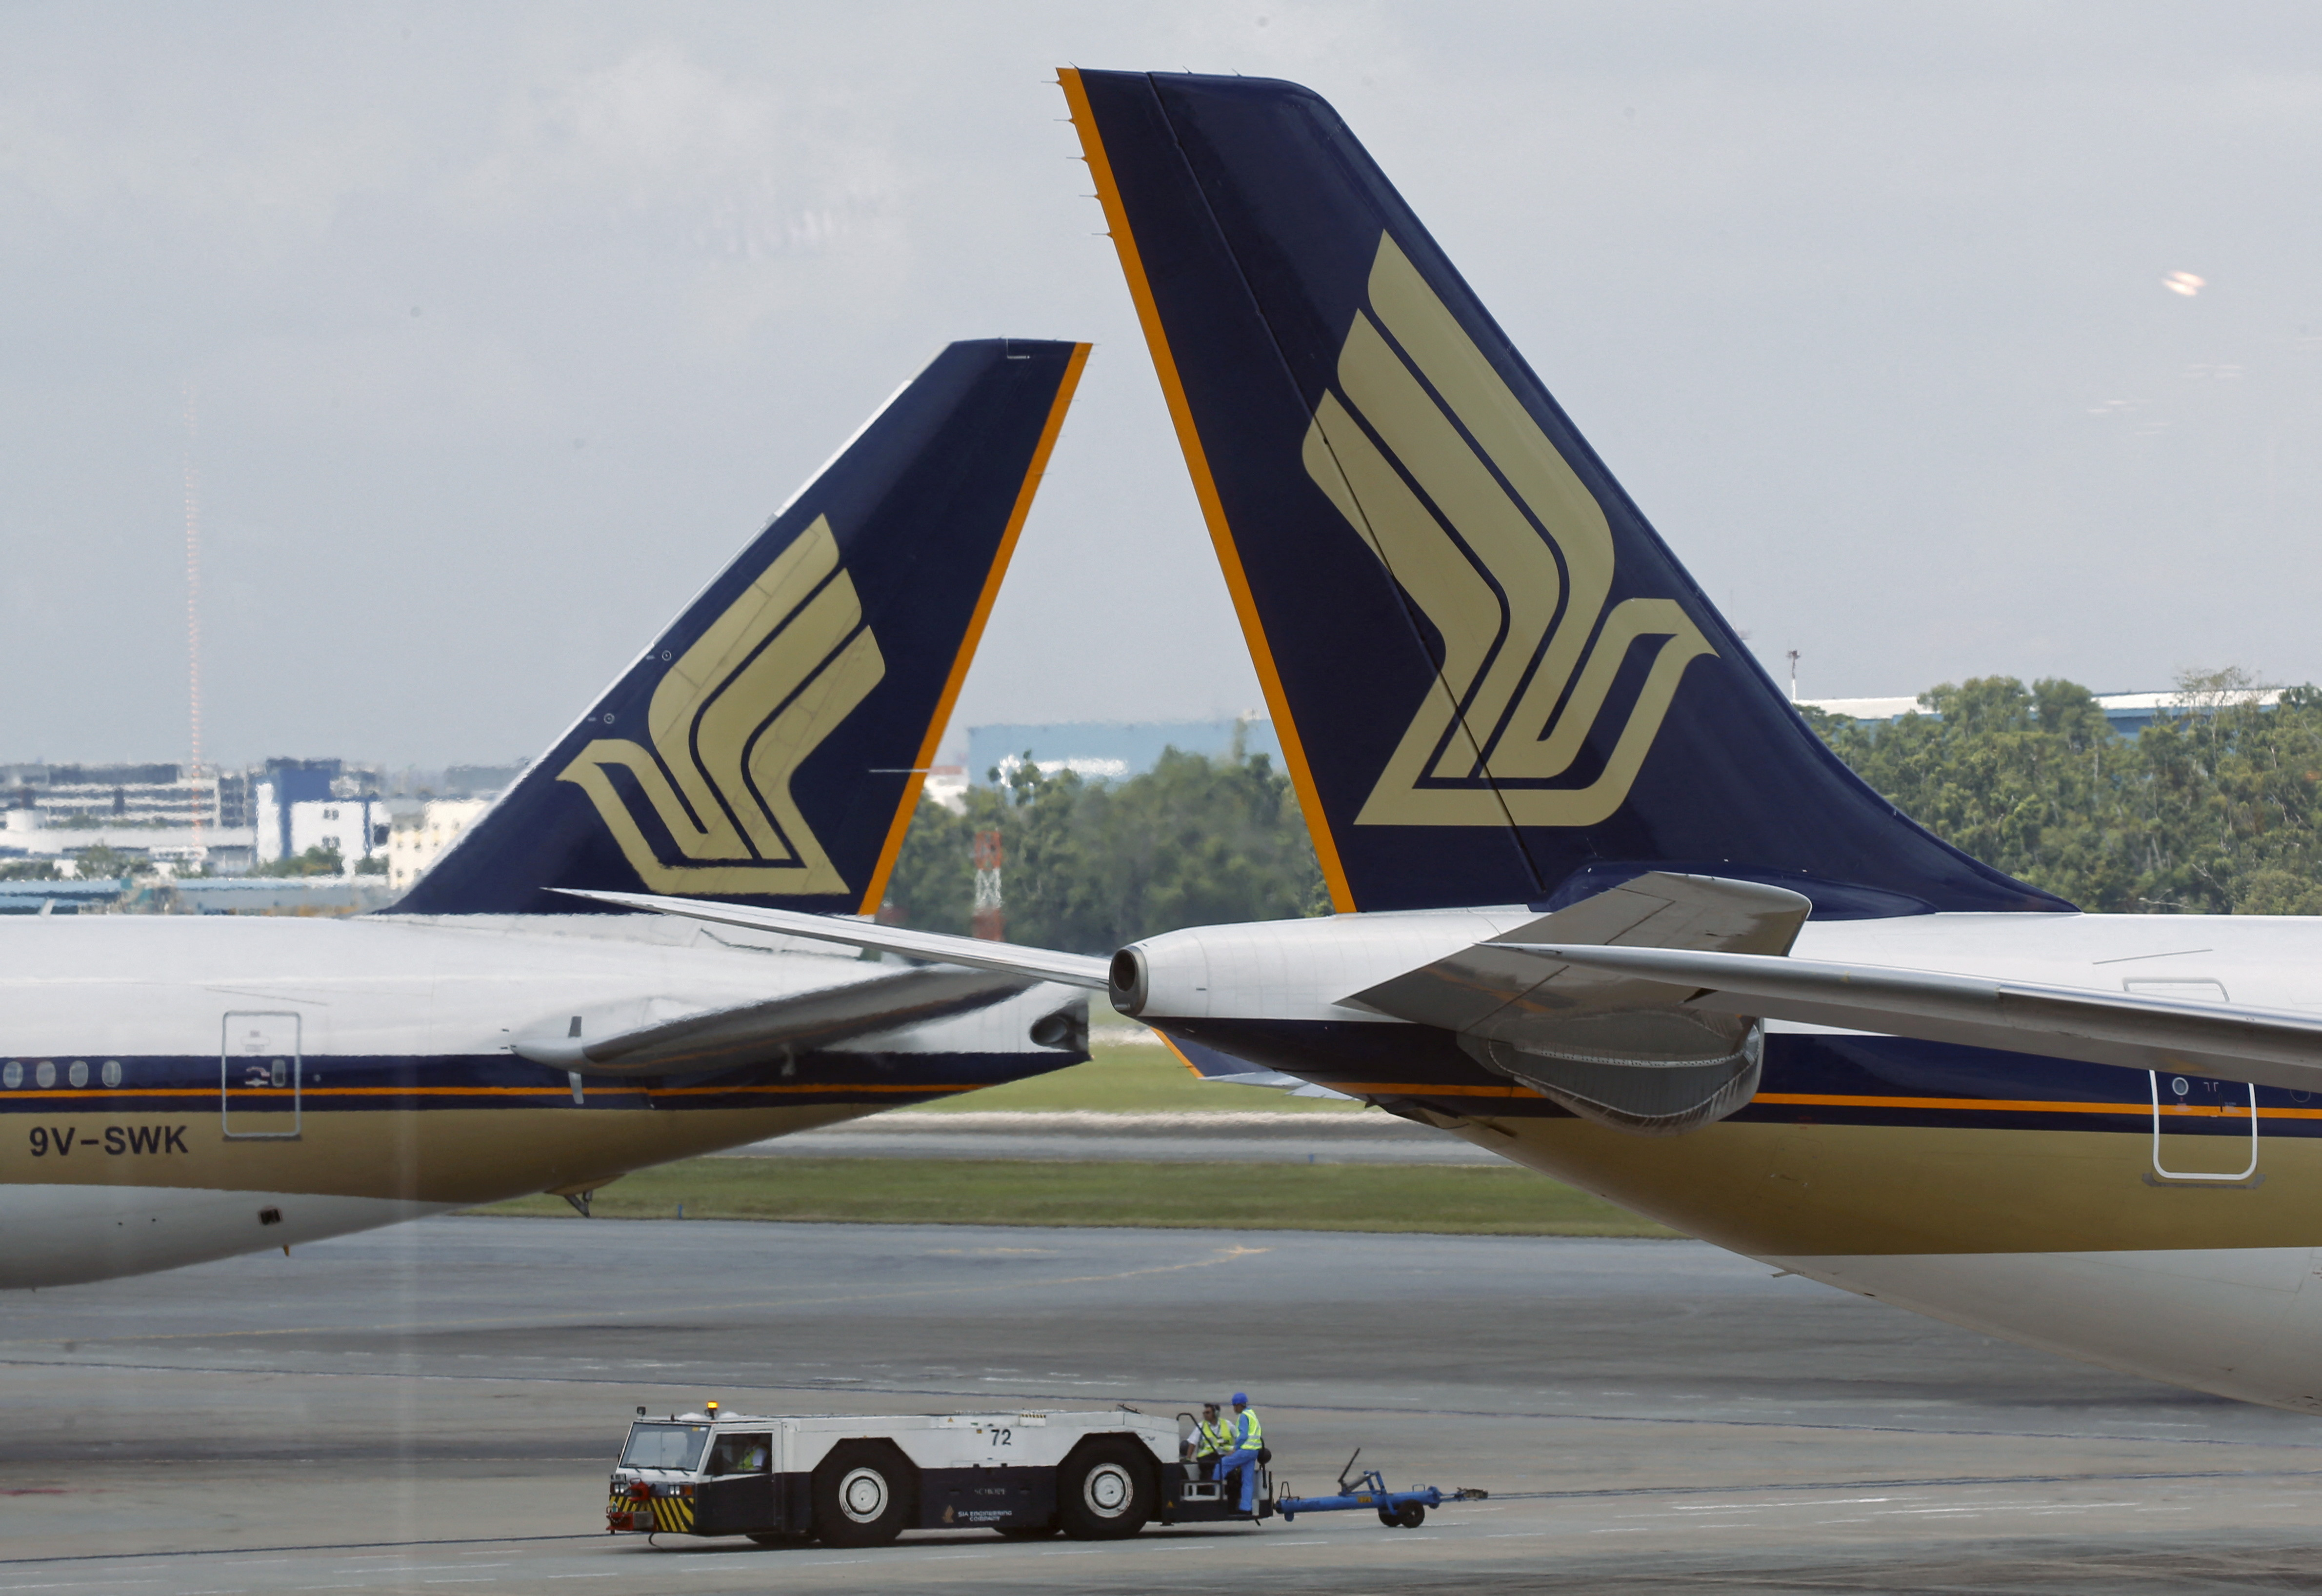 Singapore Airlines (SIA) planes sit on the tarmac in Singapore's Changi Airport